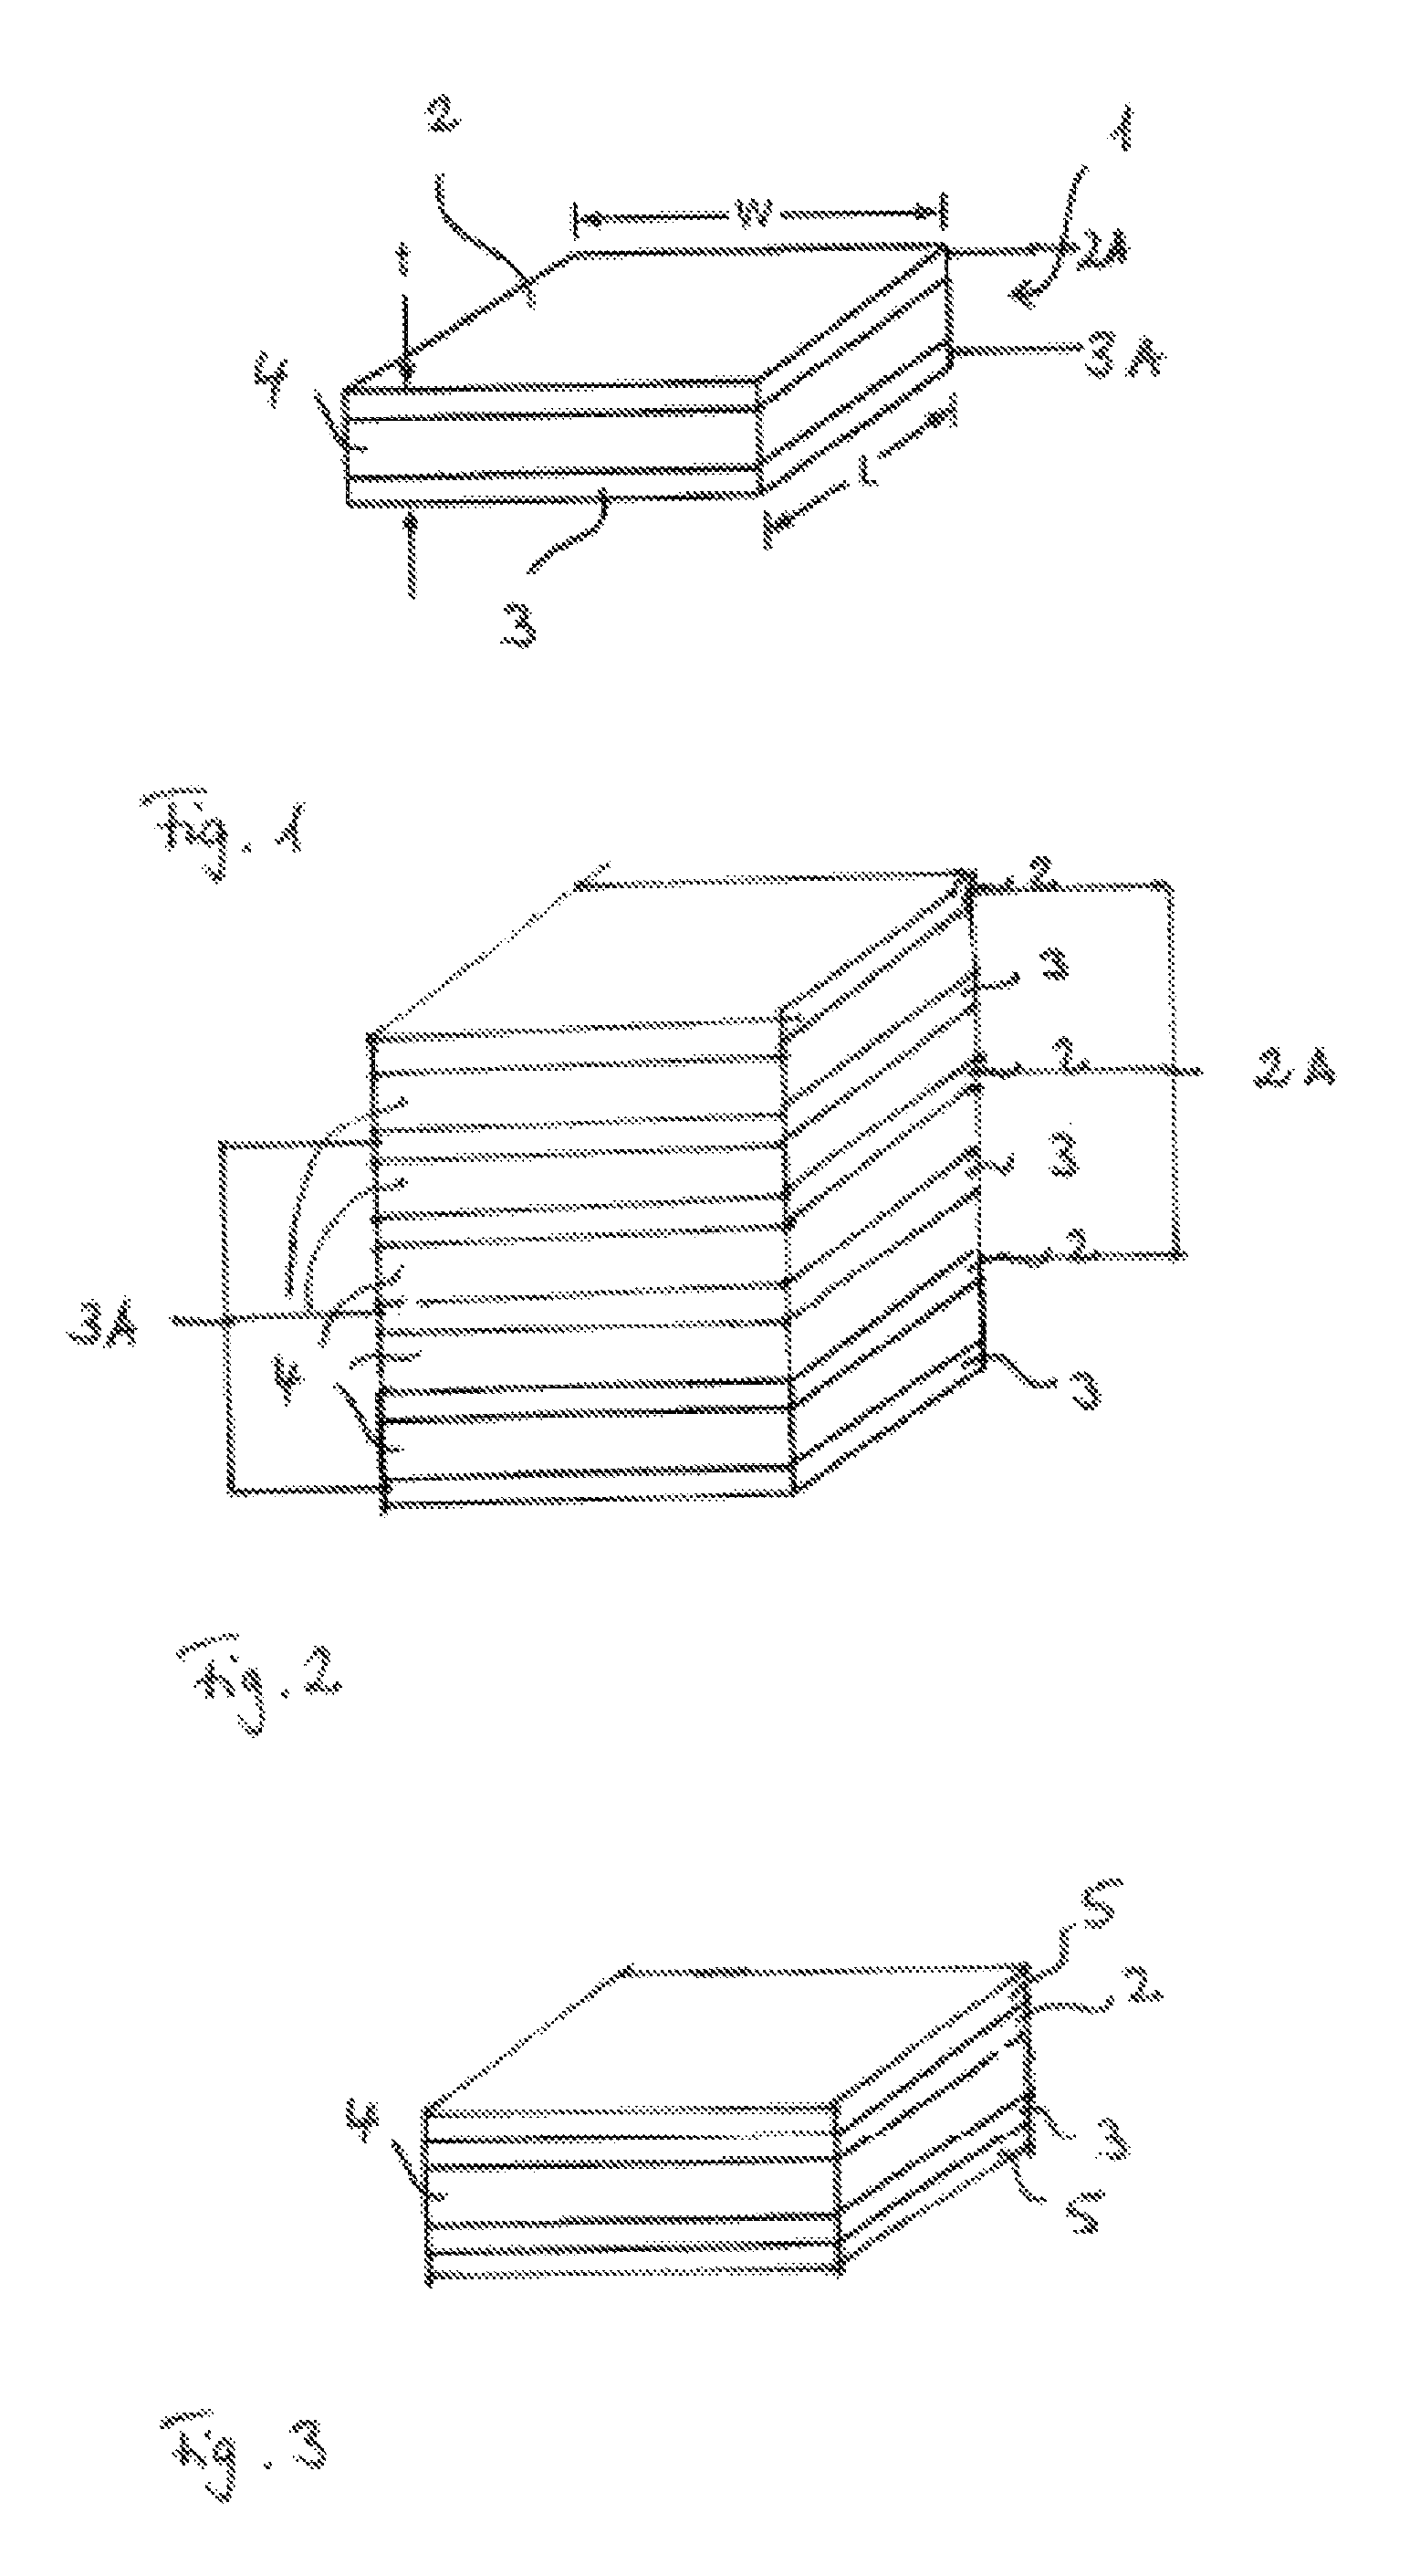 Fluorosilicone-based dielectric elastomer and method for its production